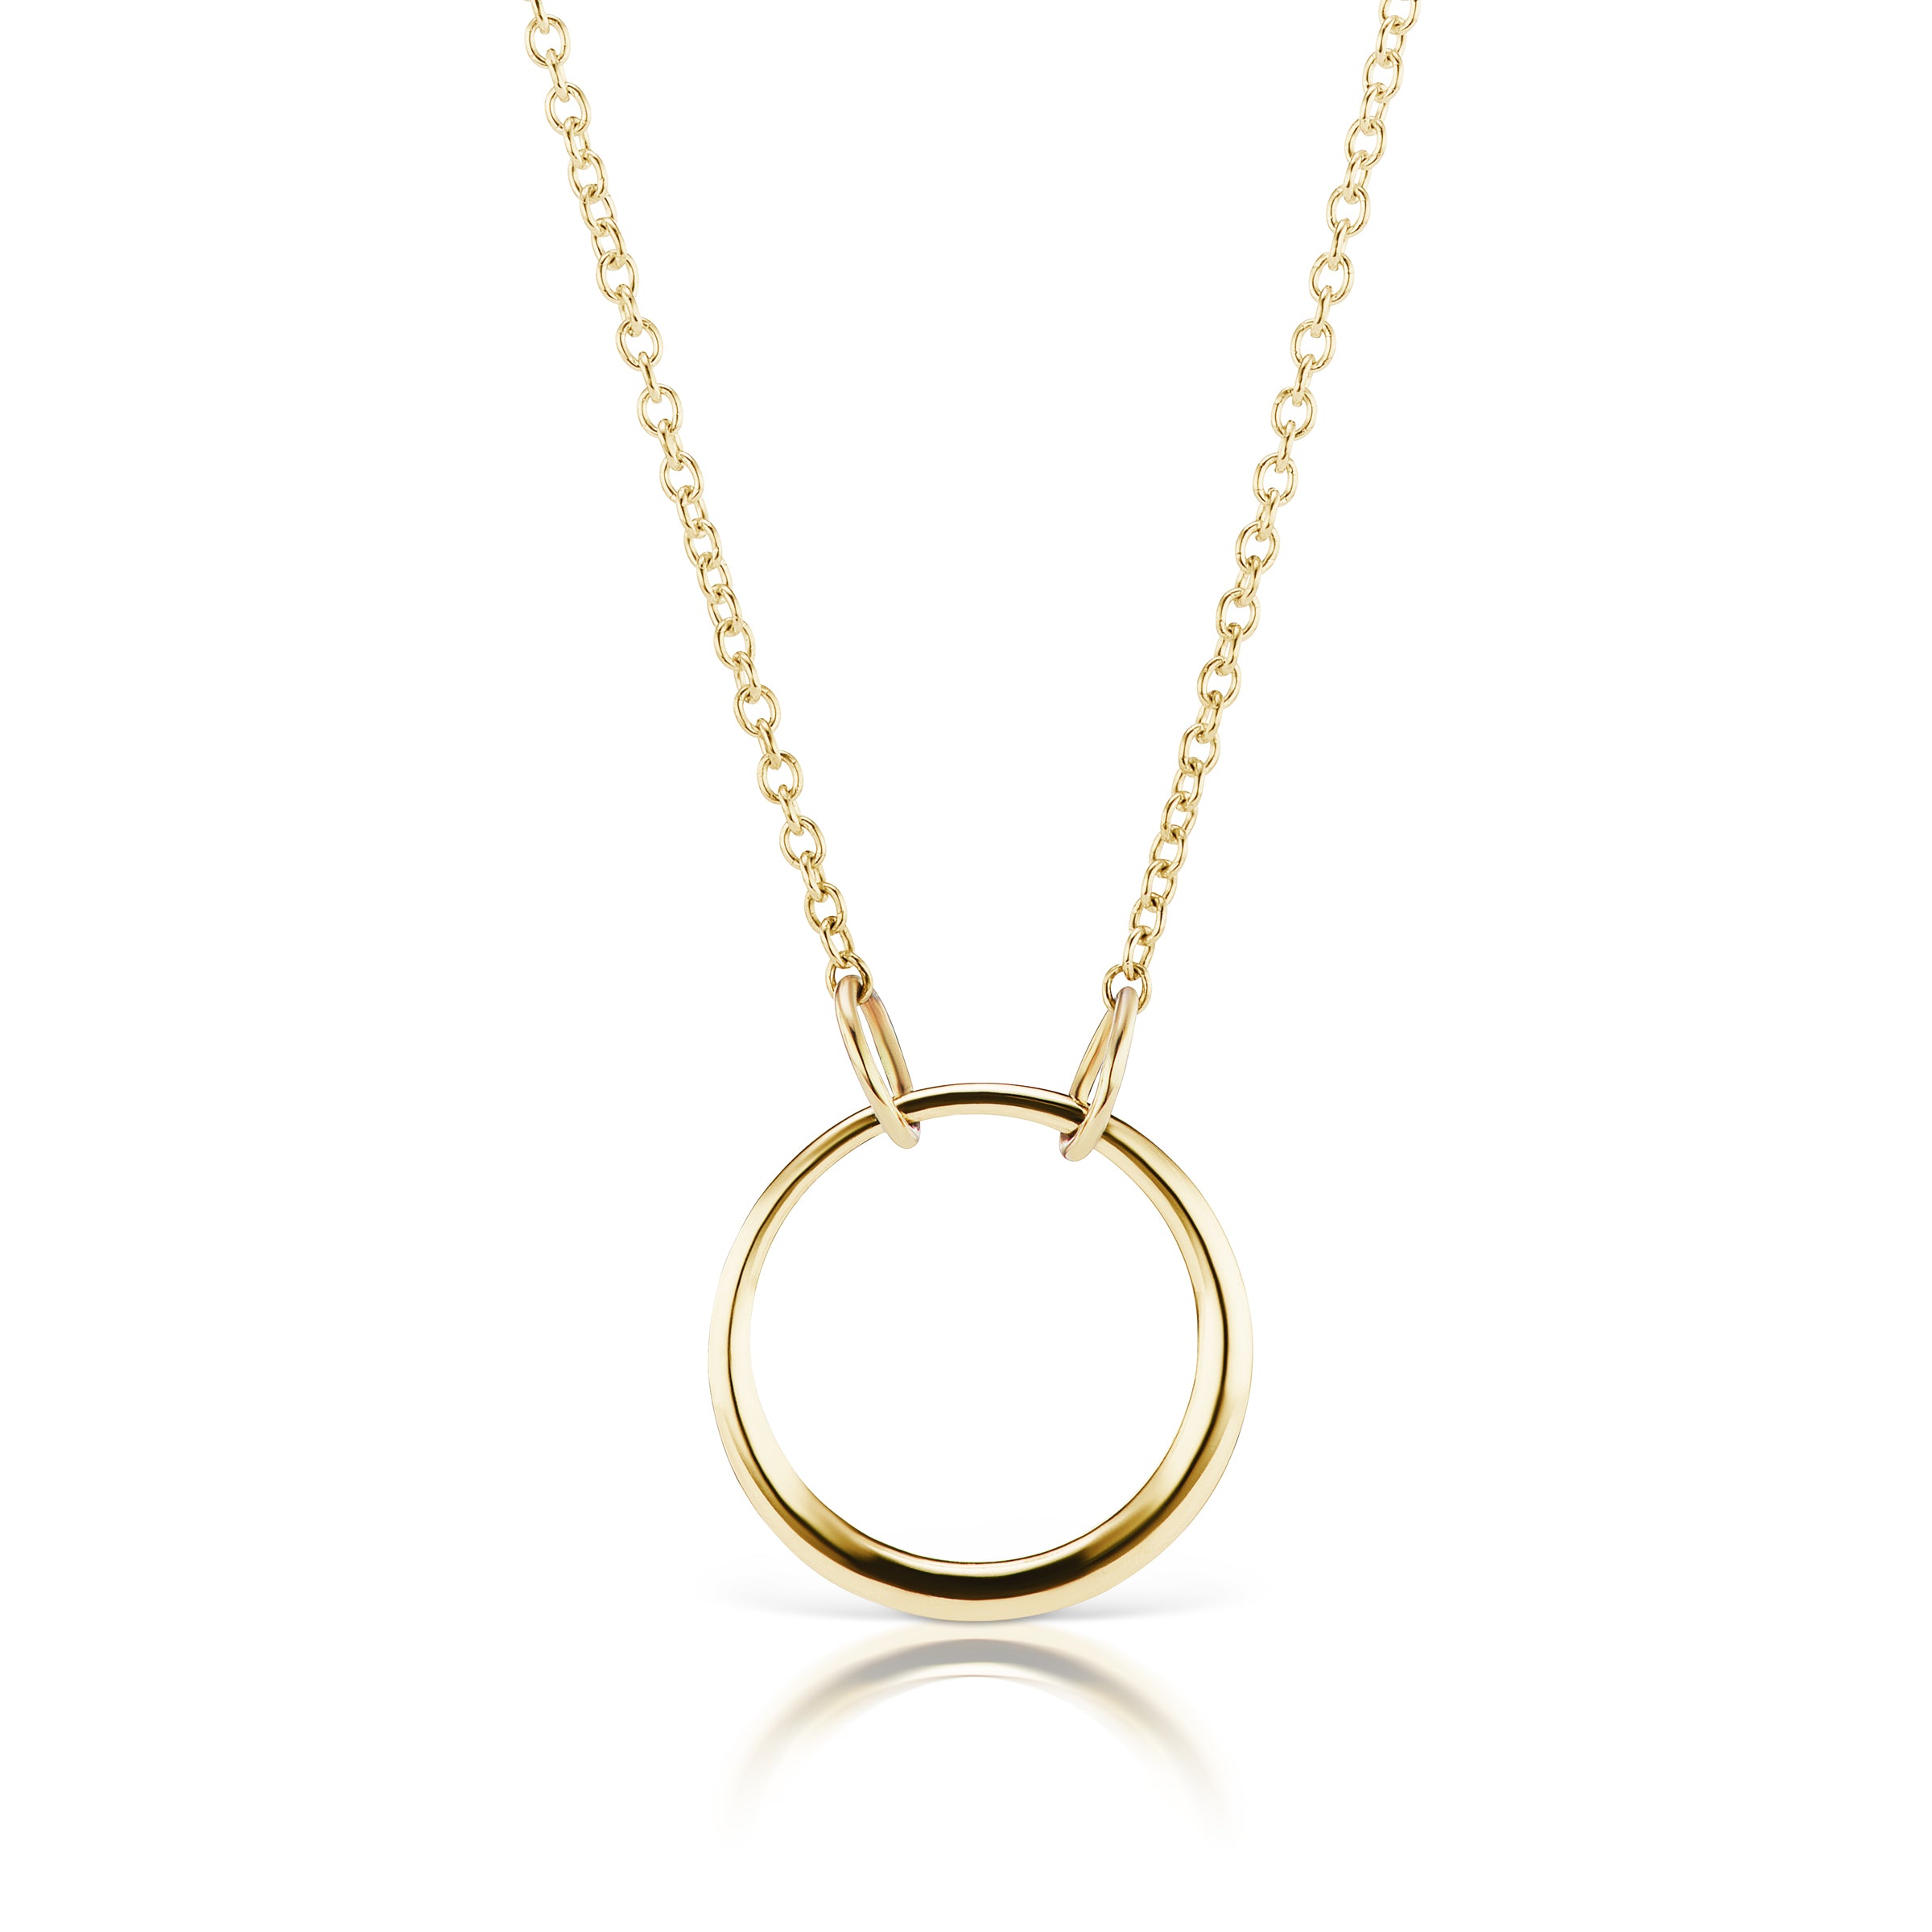 The Gold Petite Loop Necklace